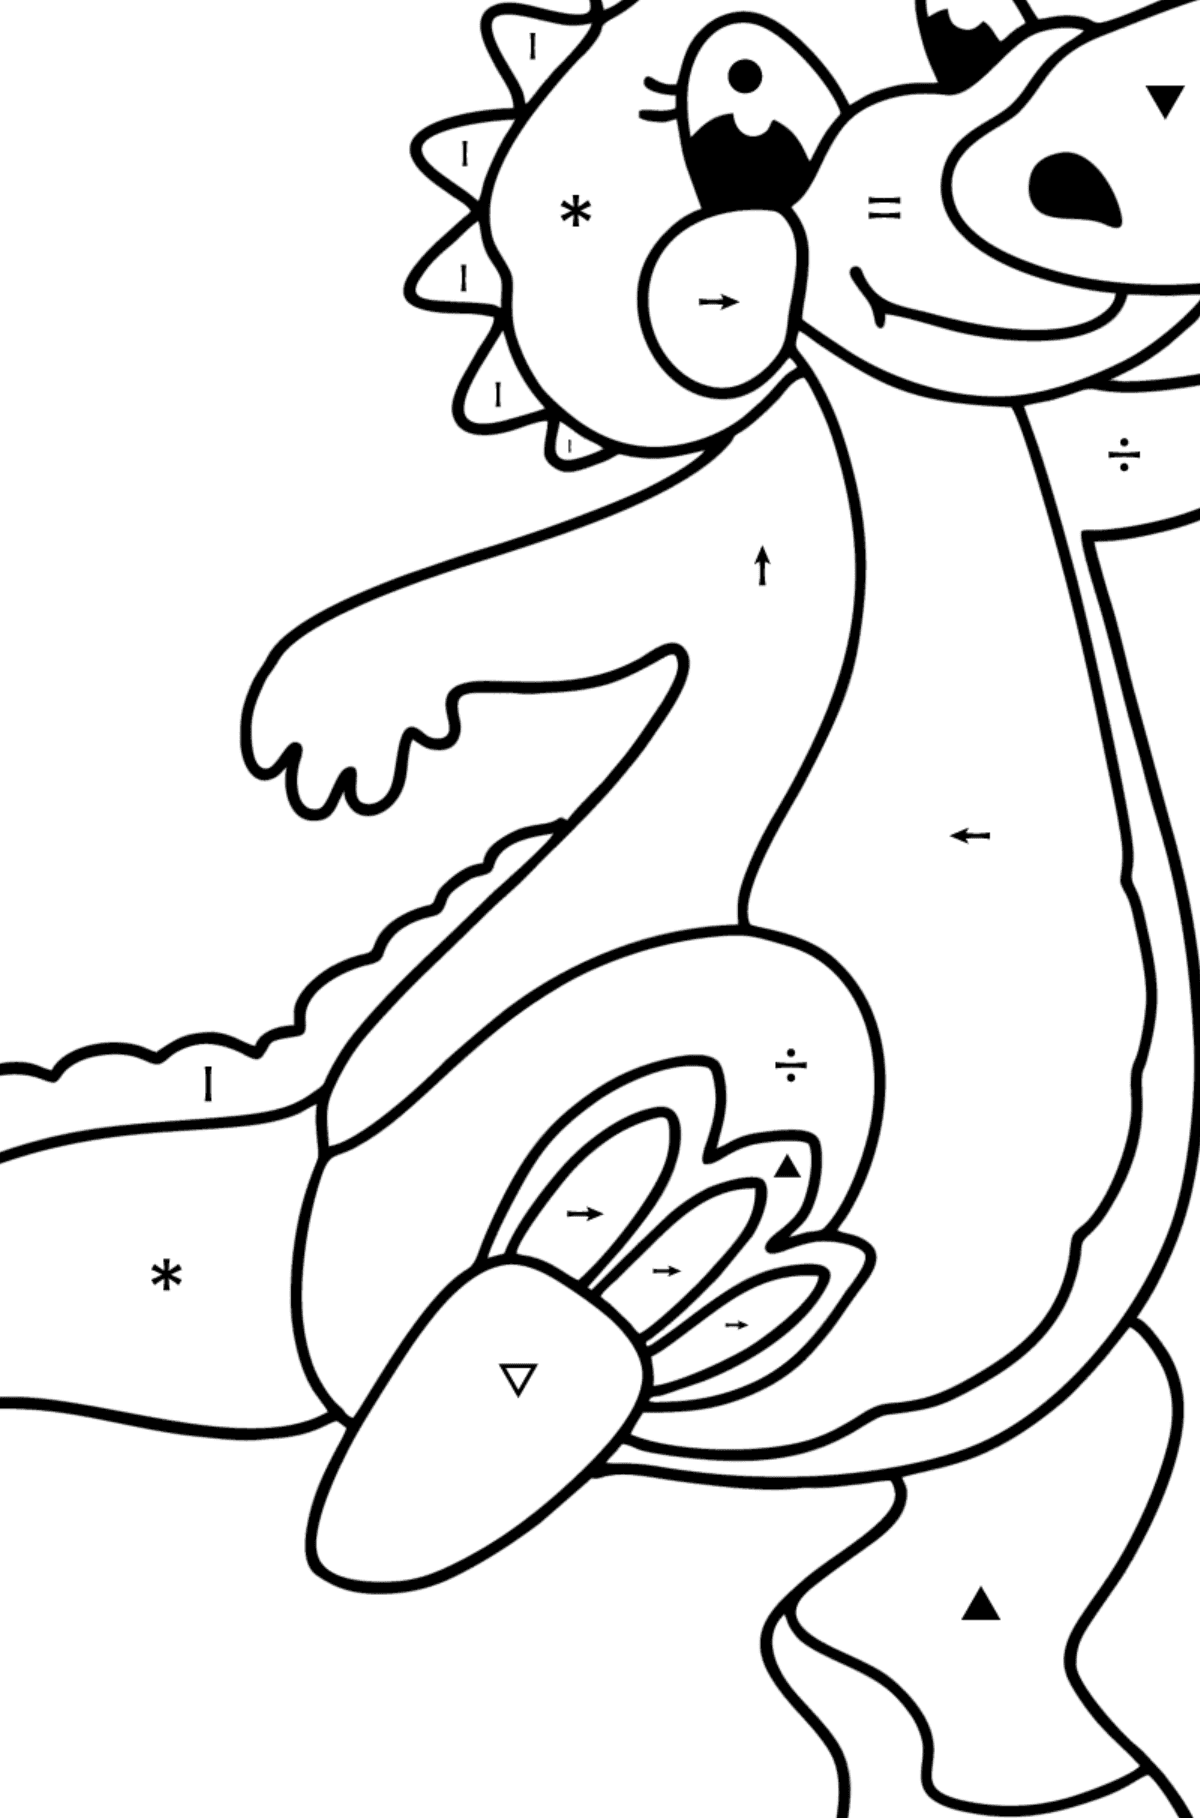 Happy dragon baby coloring page - Coloring by Symbols for Kids